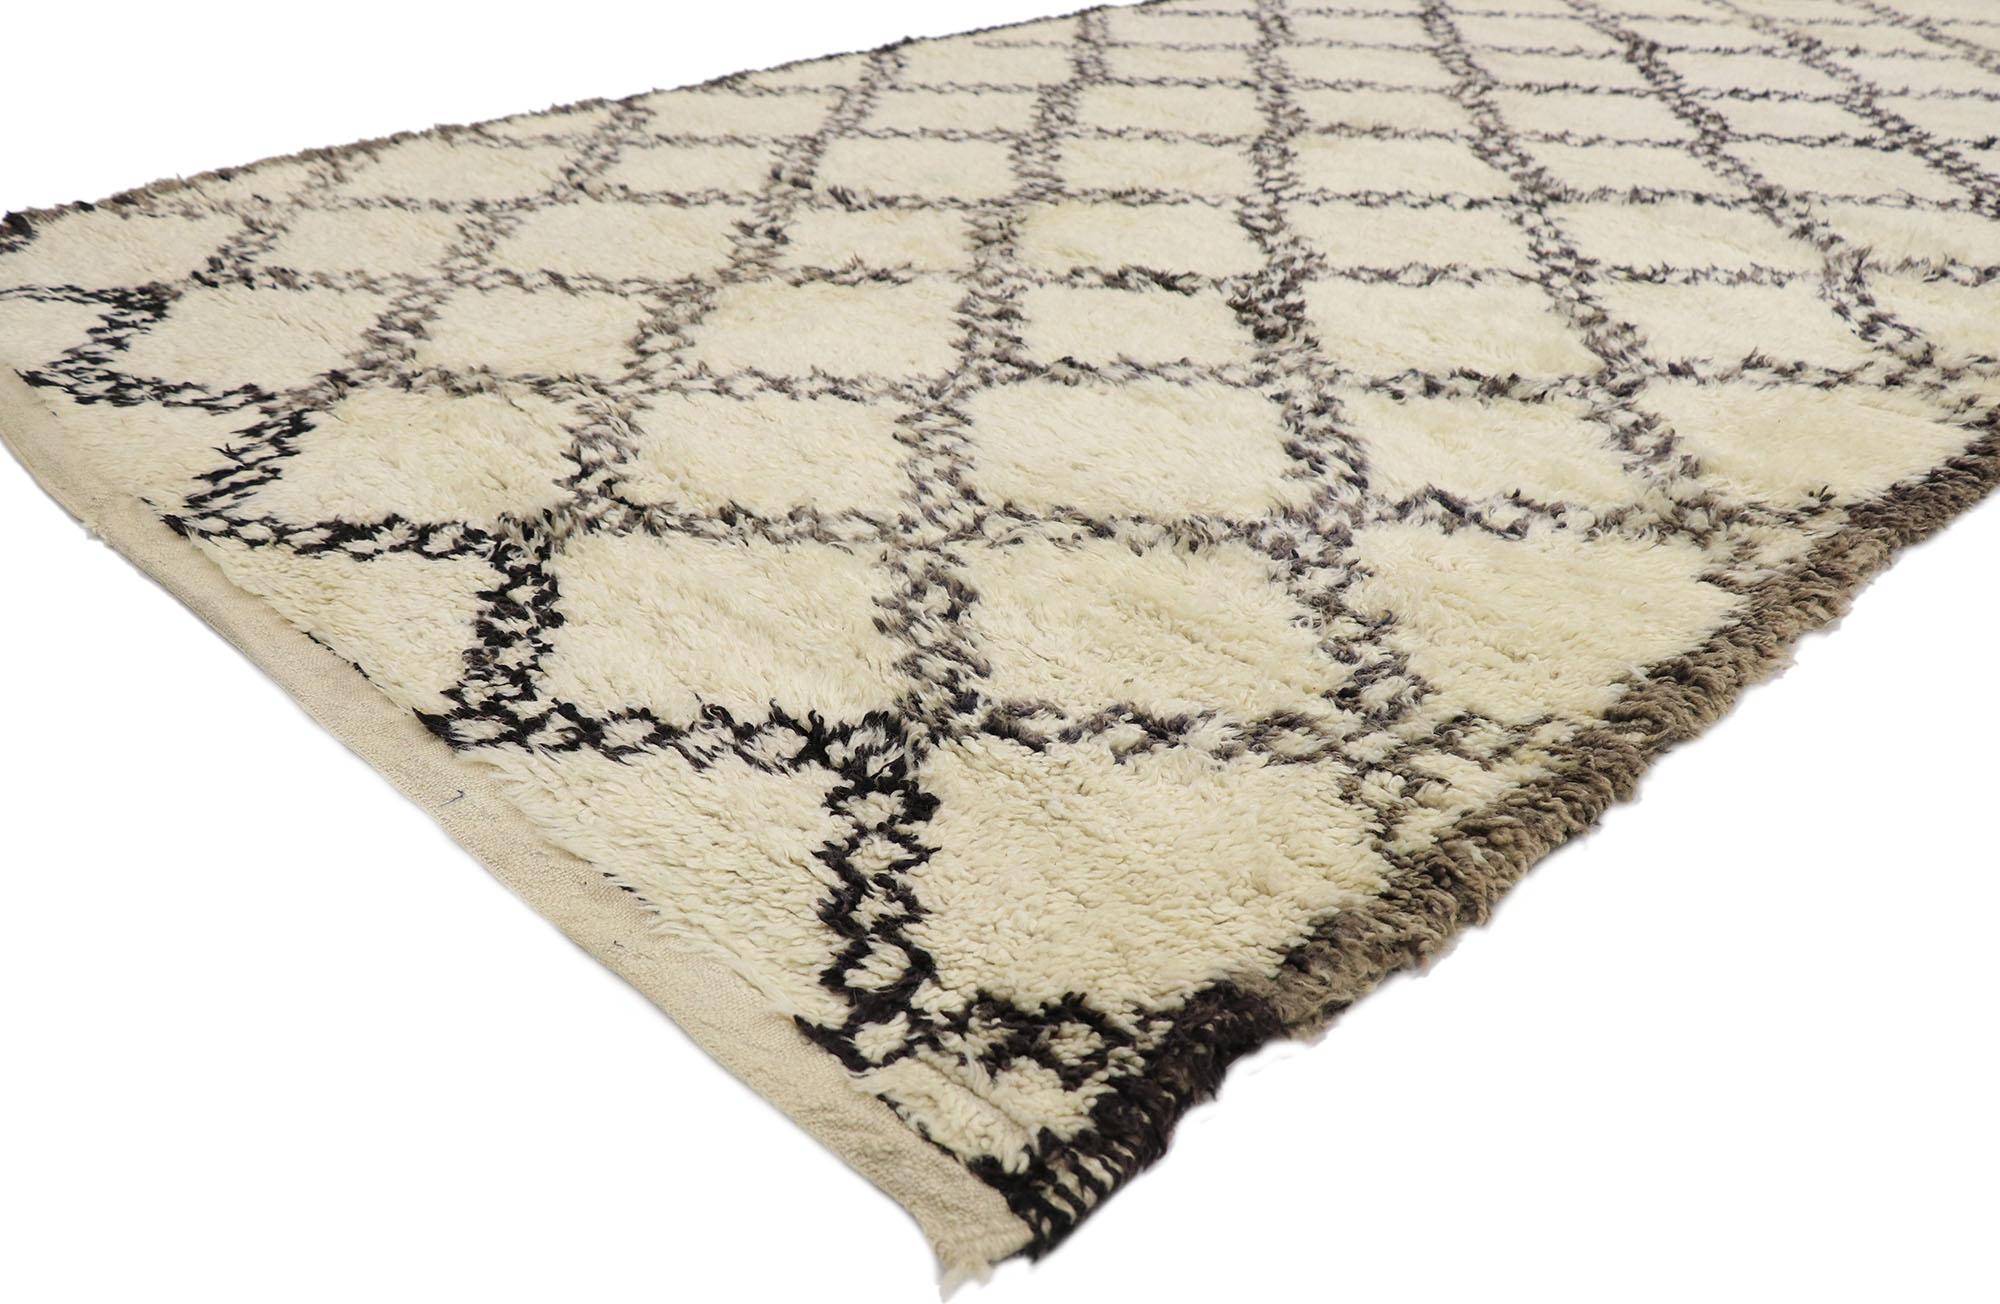 21366 vintage Berber Beni Ourain Moroccan rug with Mid-Century Modern style 06'00 x 10'08. With its simplicity, plush pile and Mid-Century Modern style, this hand knotted wool vintage Berber Beni Ourain Moroccan rug is a captivating vision of woven